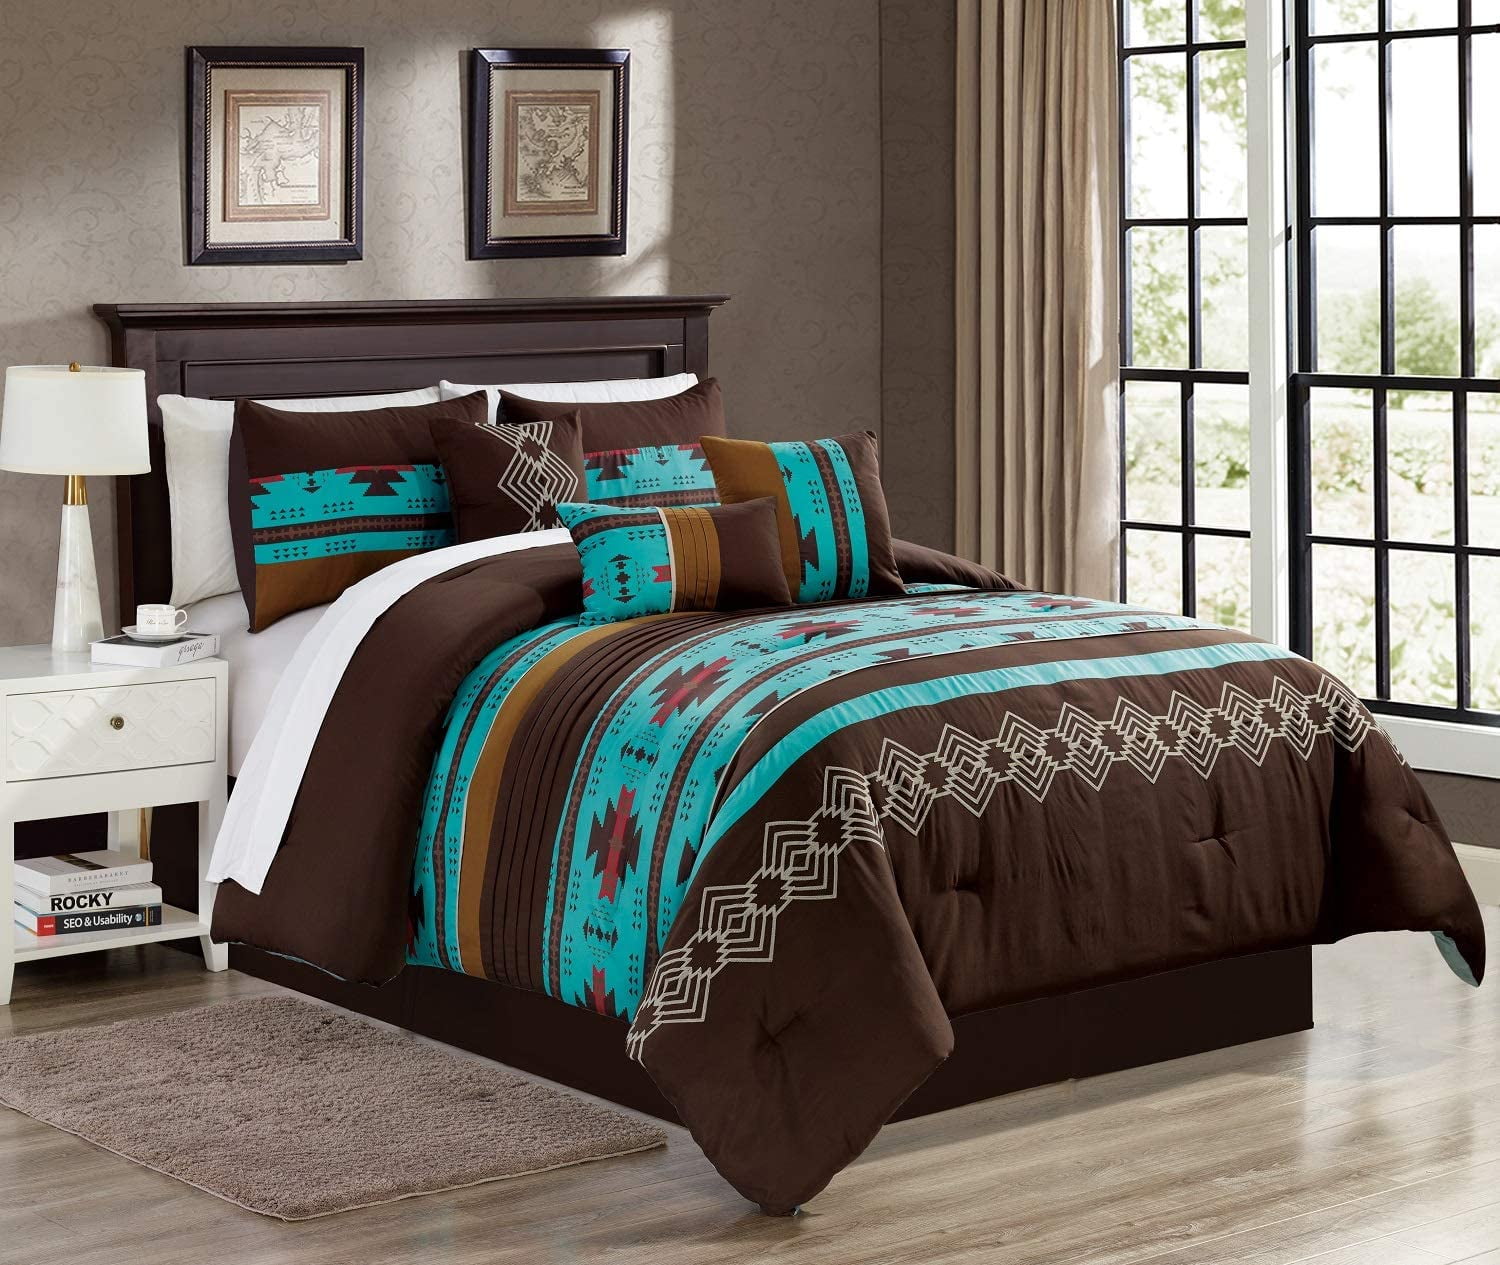 Details about   7 Piece Brown Beige Southwest Star Comforter Set Queen Or King Size 